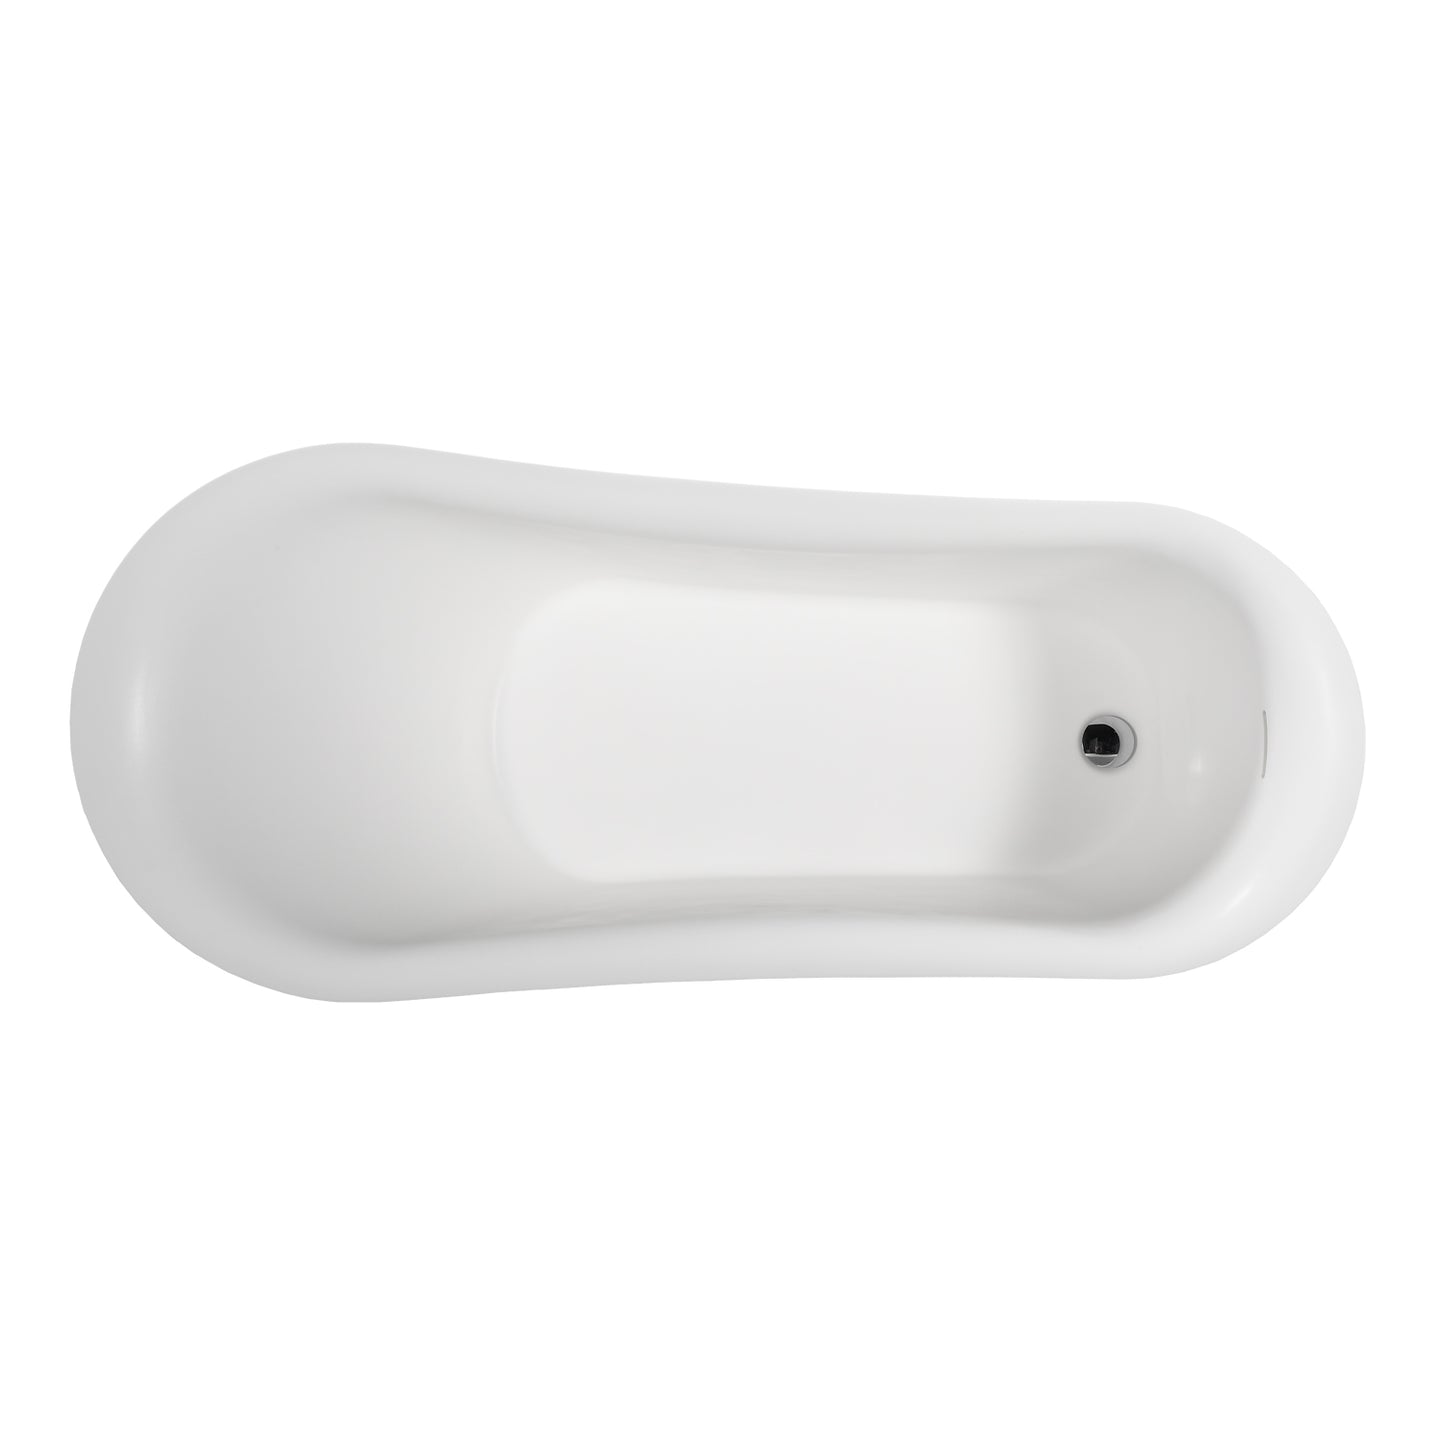 Ayanna 59" Resin Slipper Tub with Ornamental Accents No Faucet Holes Matte White